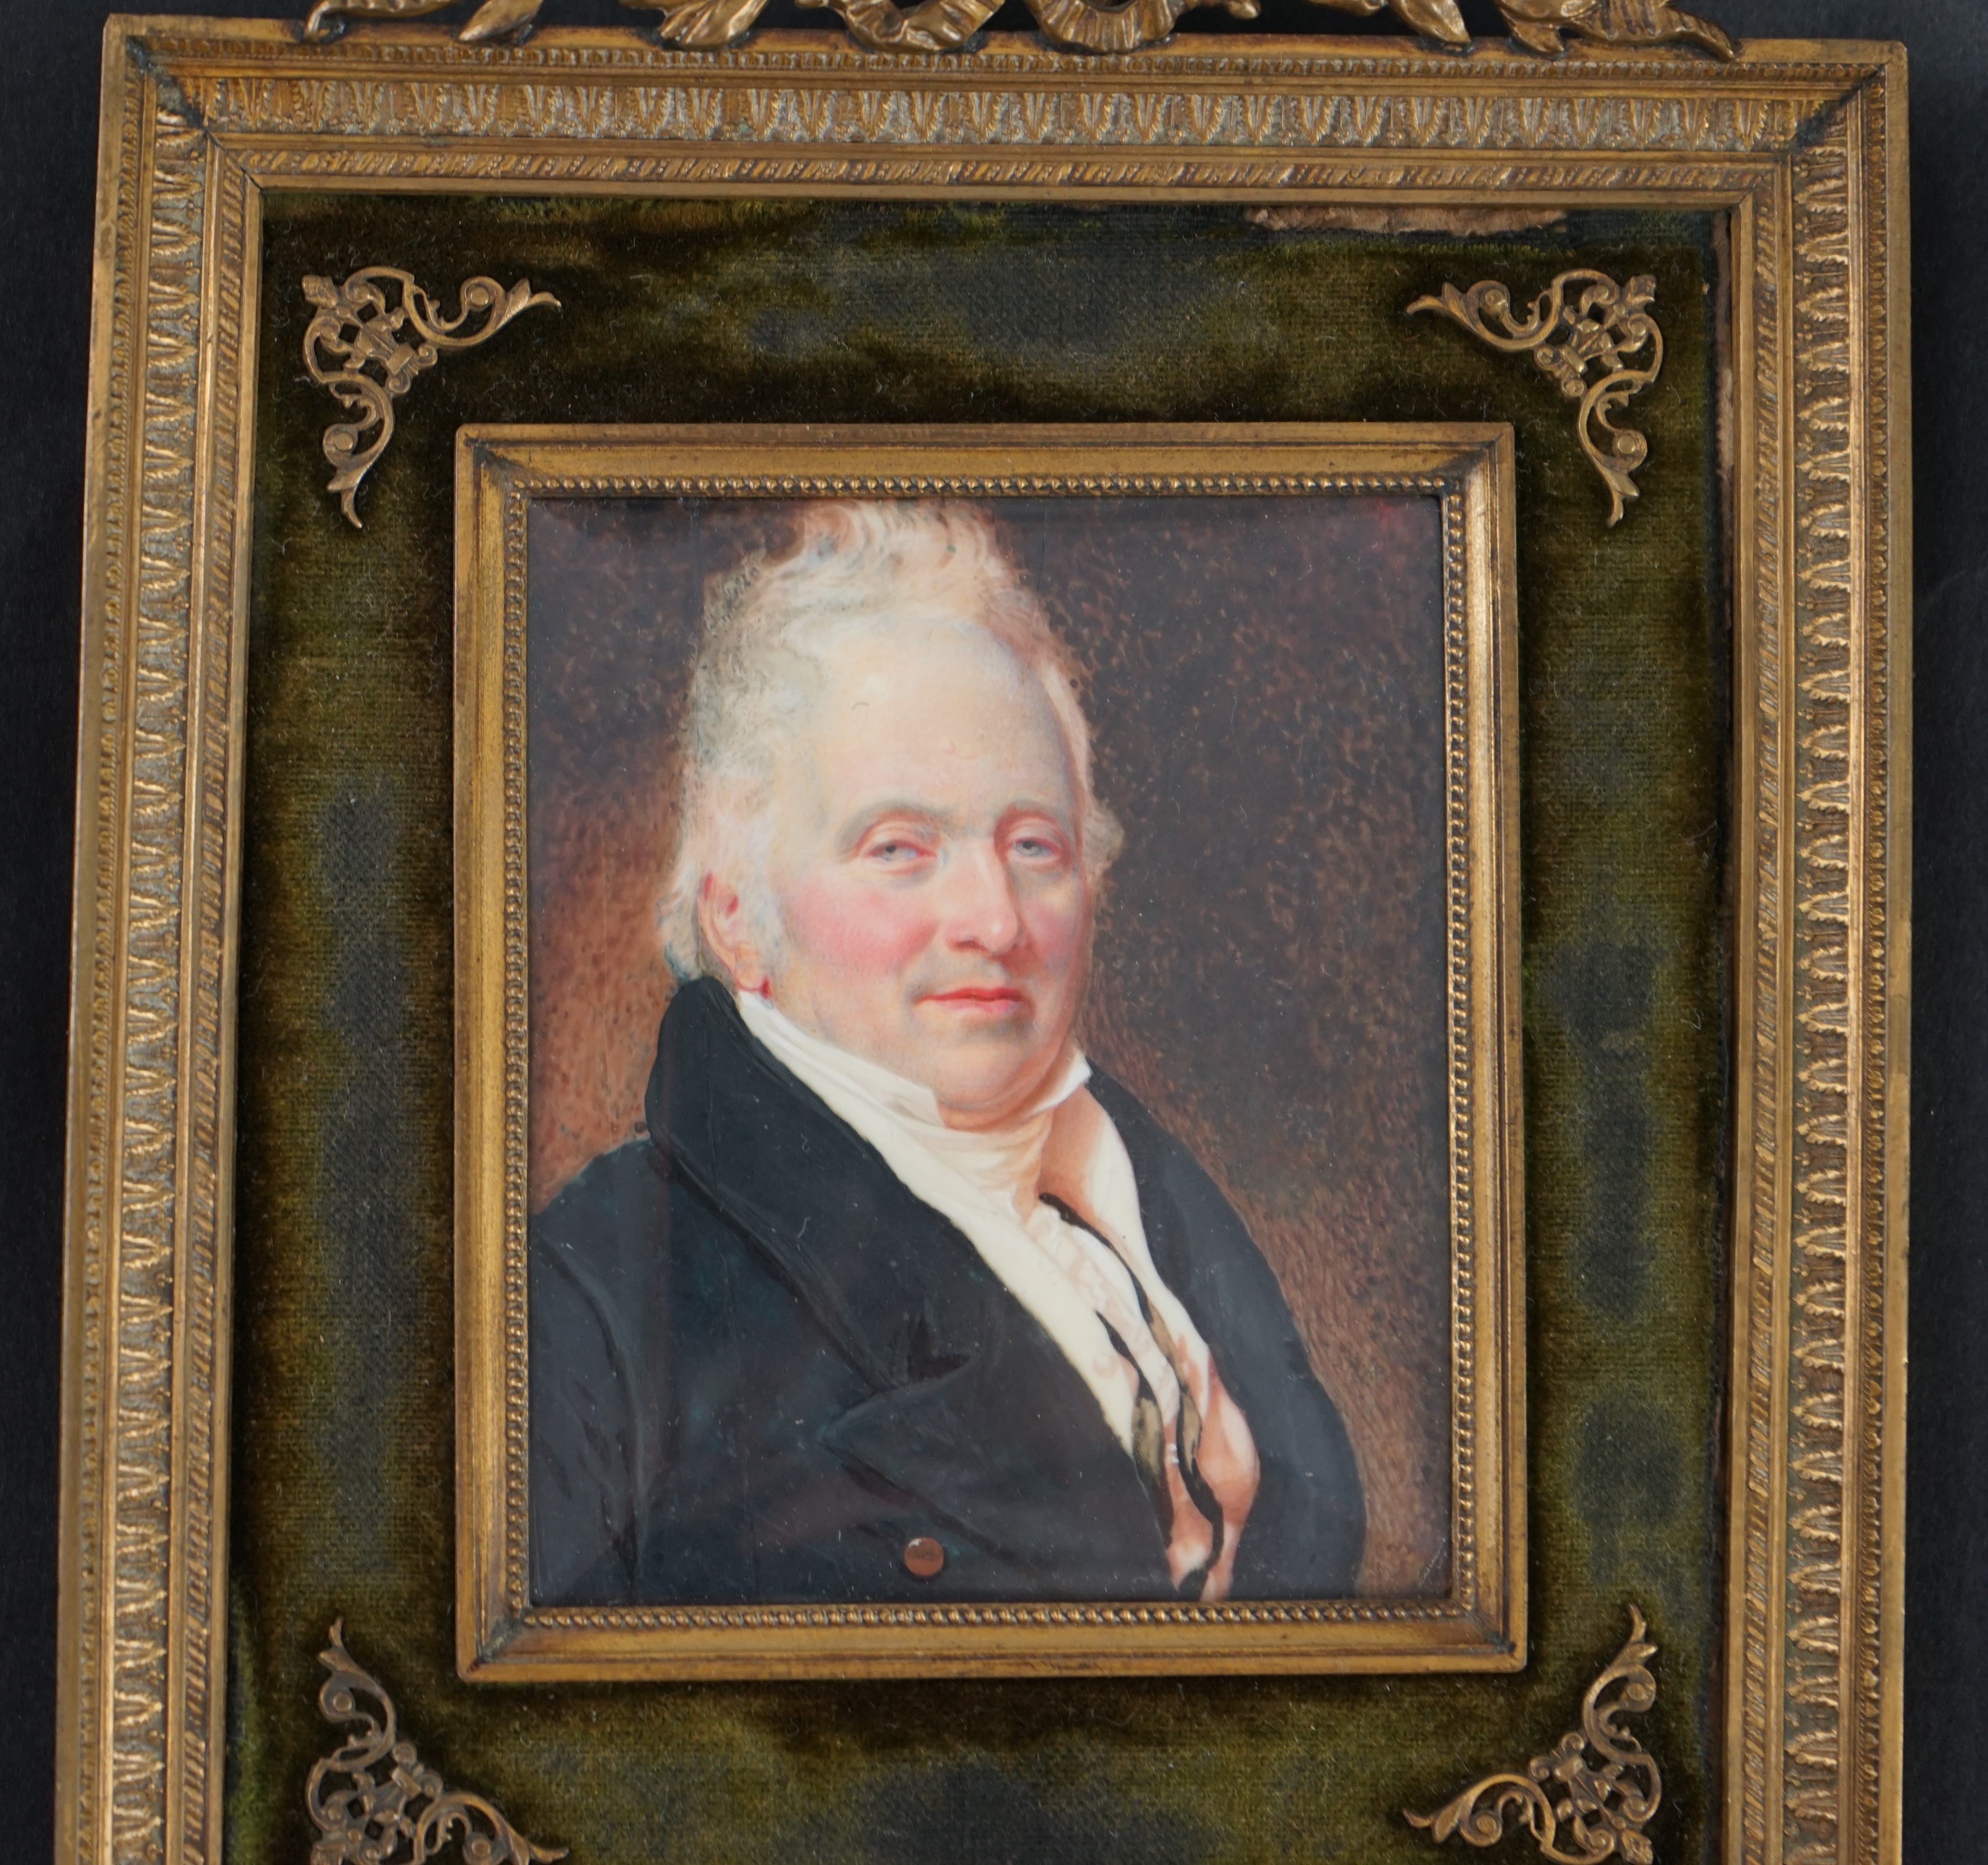 Sir William John Newton (1785-1869), Portrait miniature of a gentleman, watercolour on ivory, 6.8 x 5.6cm. CITES Submission reference 57X1PCWT